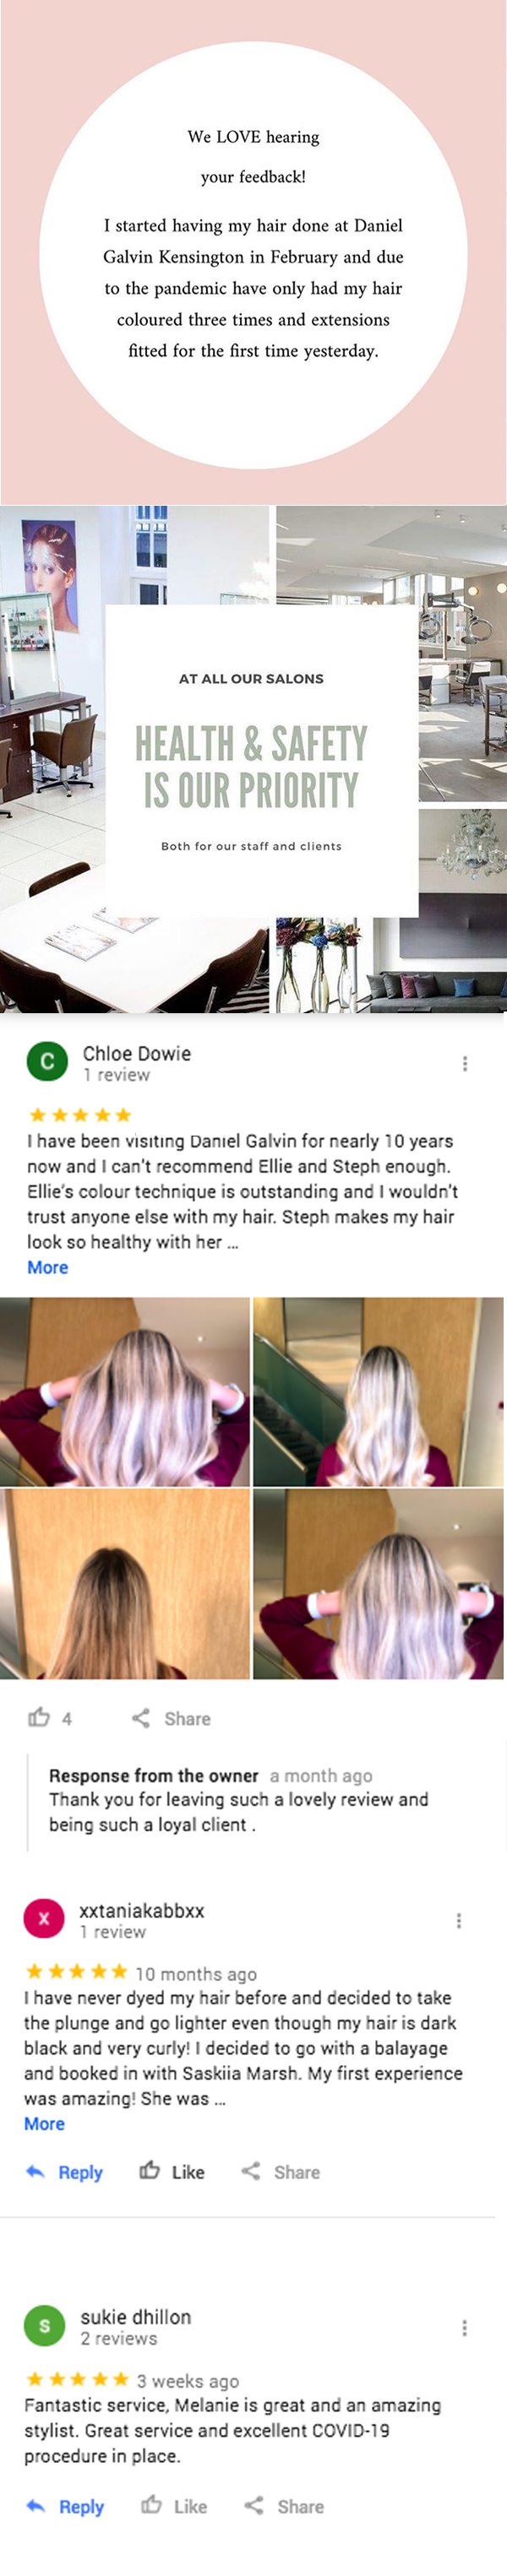 reviews for safety and hairdressing